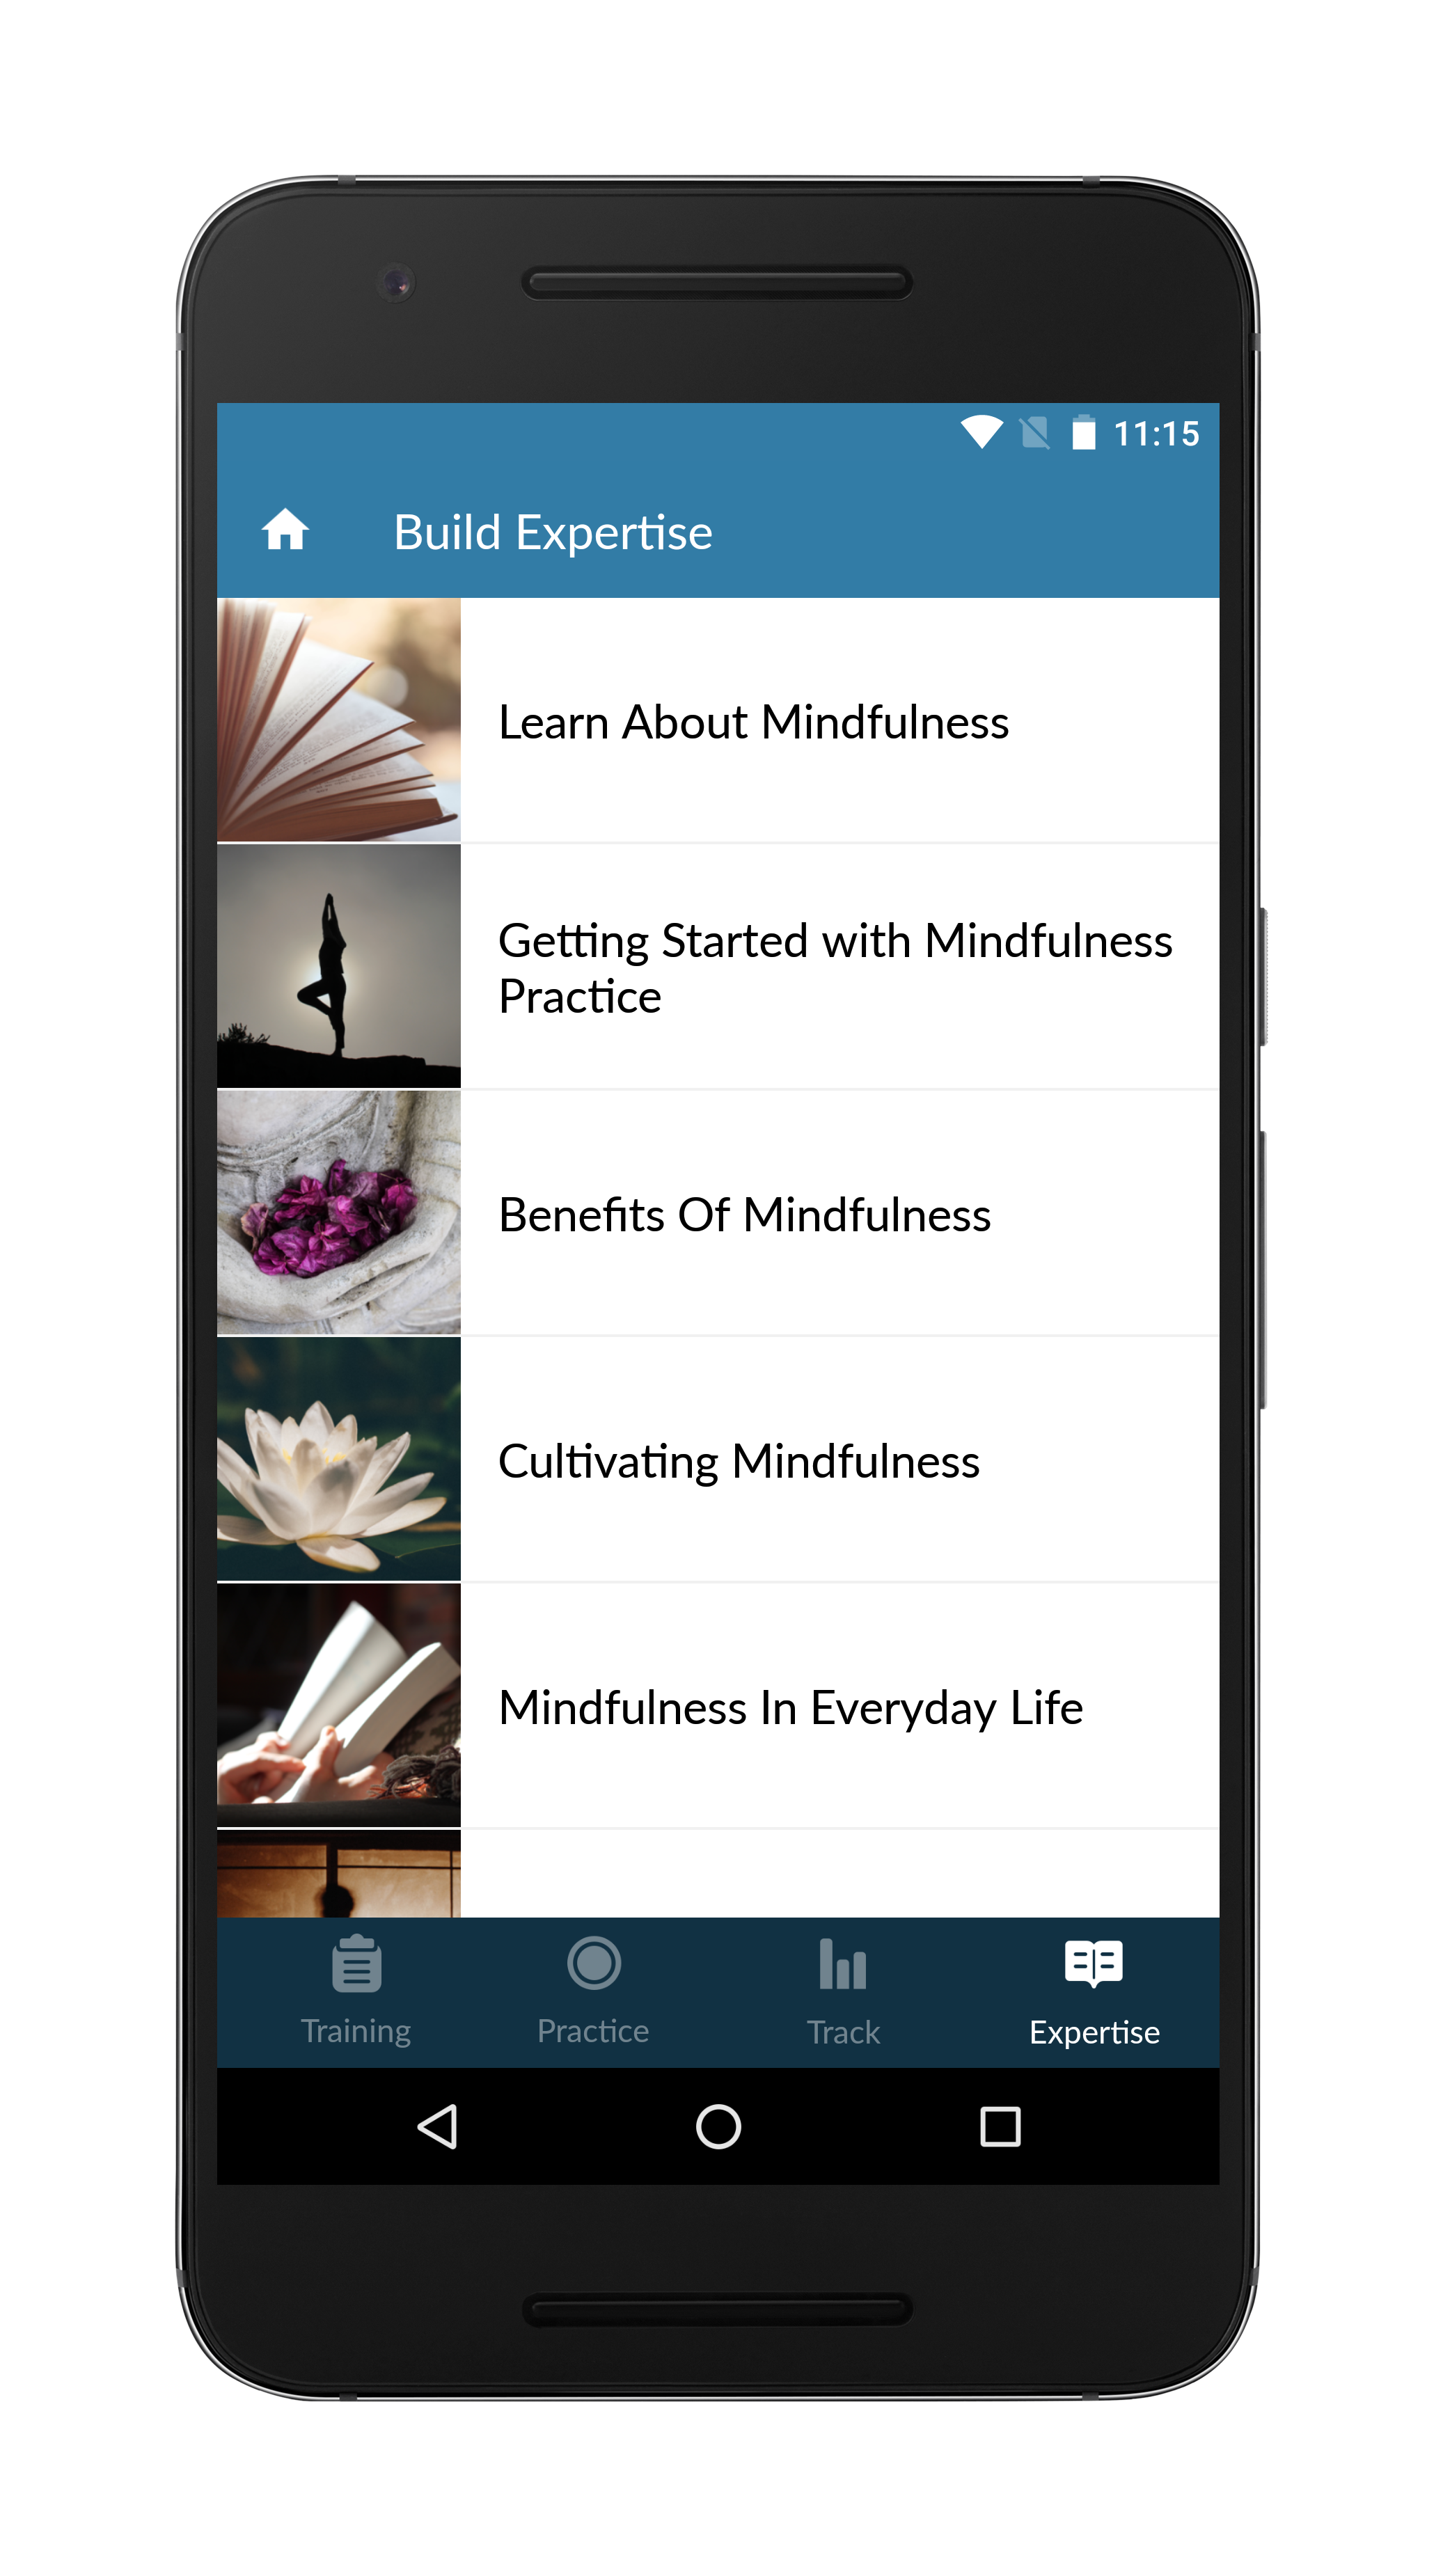 Mindfulness Coach build expertise screen